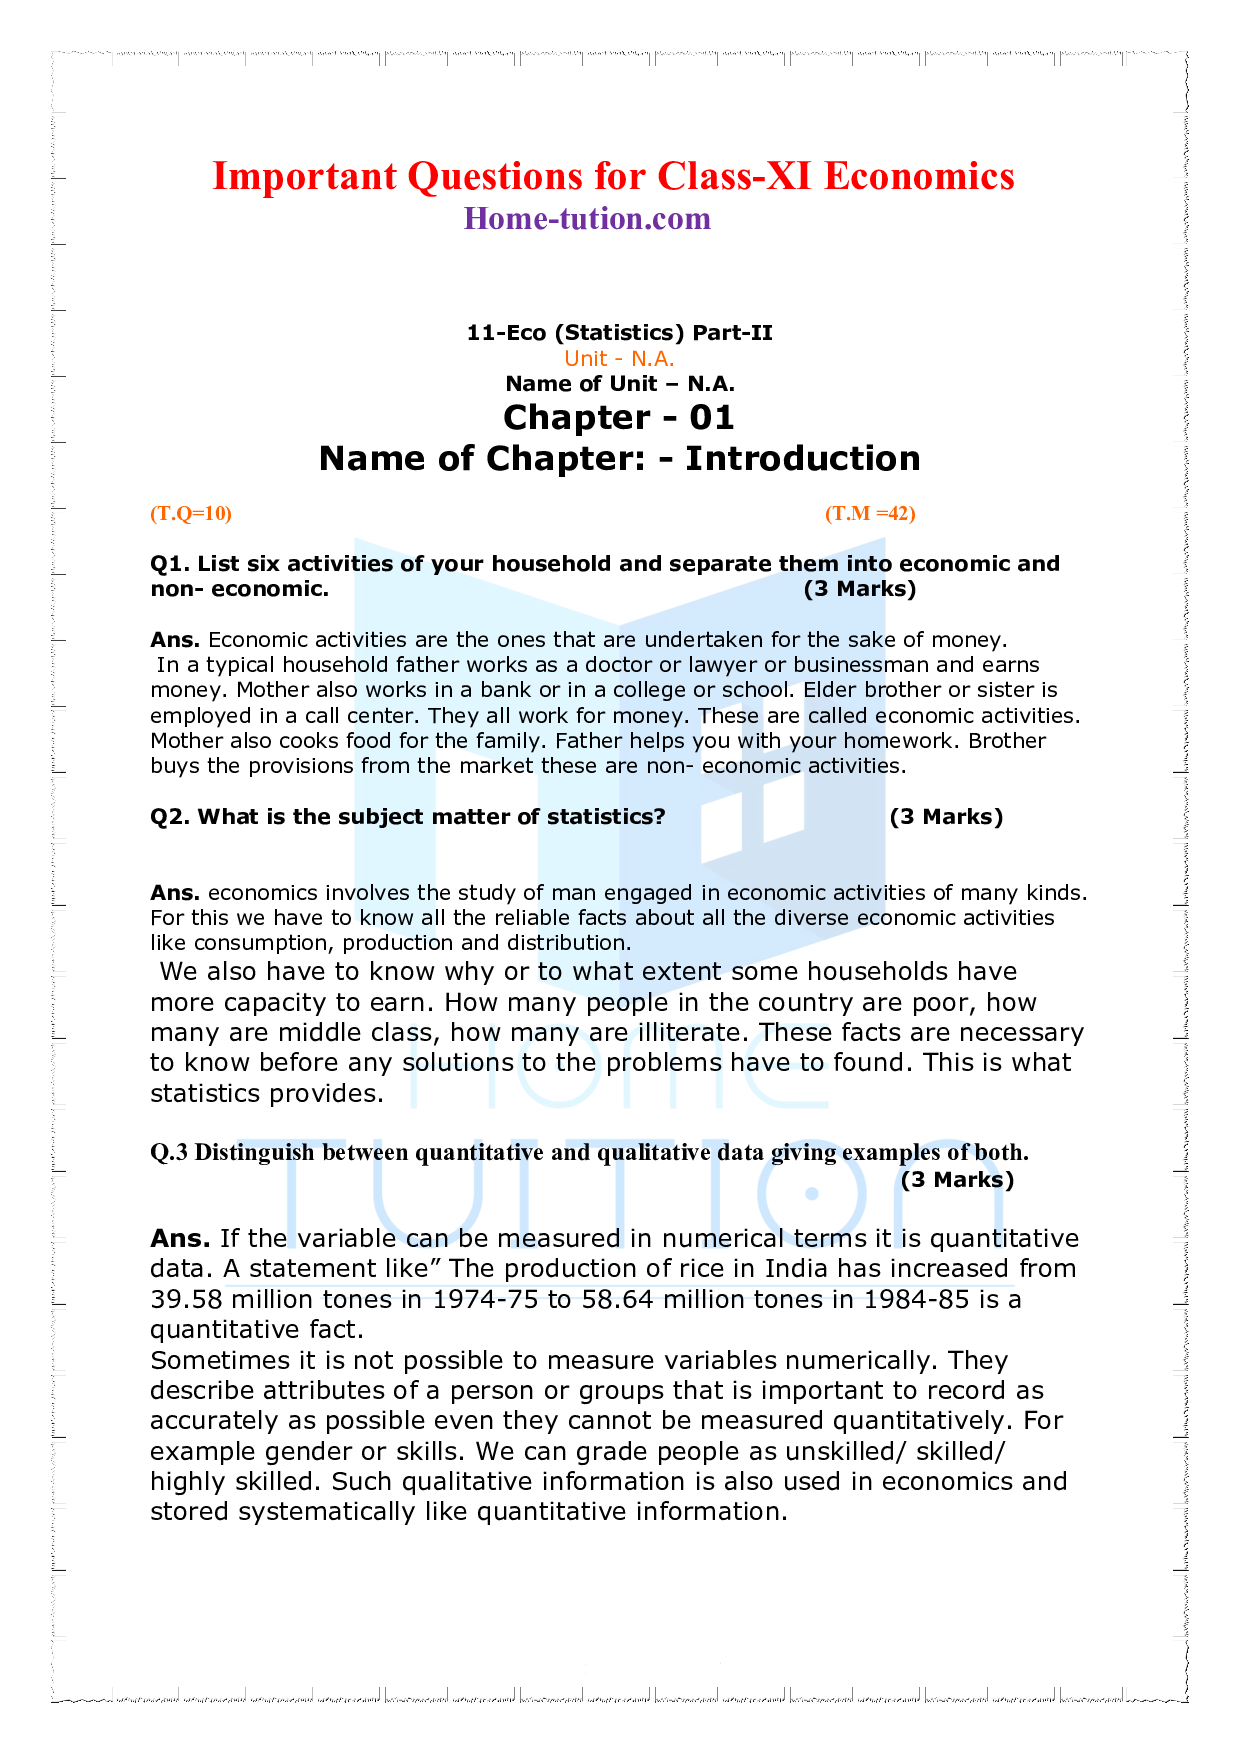 Chapter 1 Introduction (Statistics)